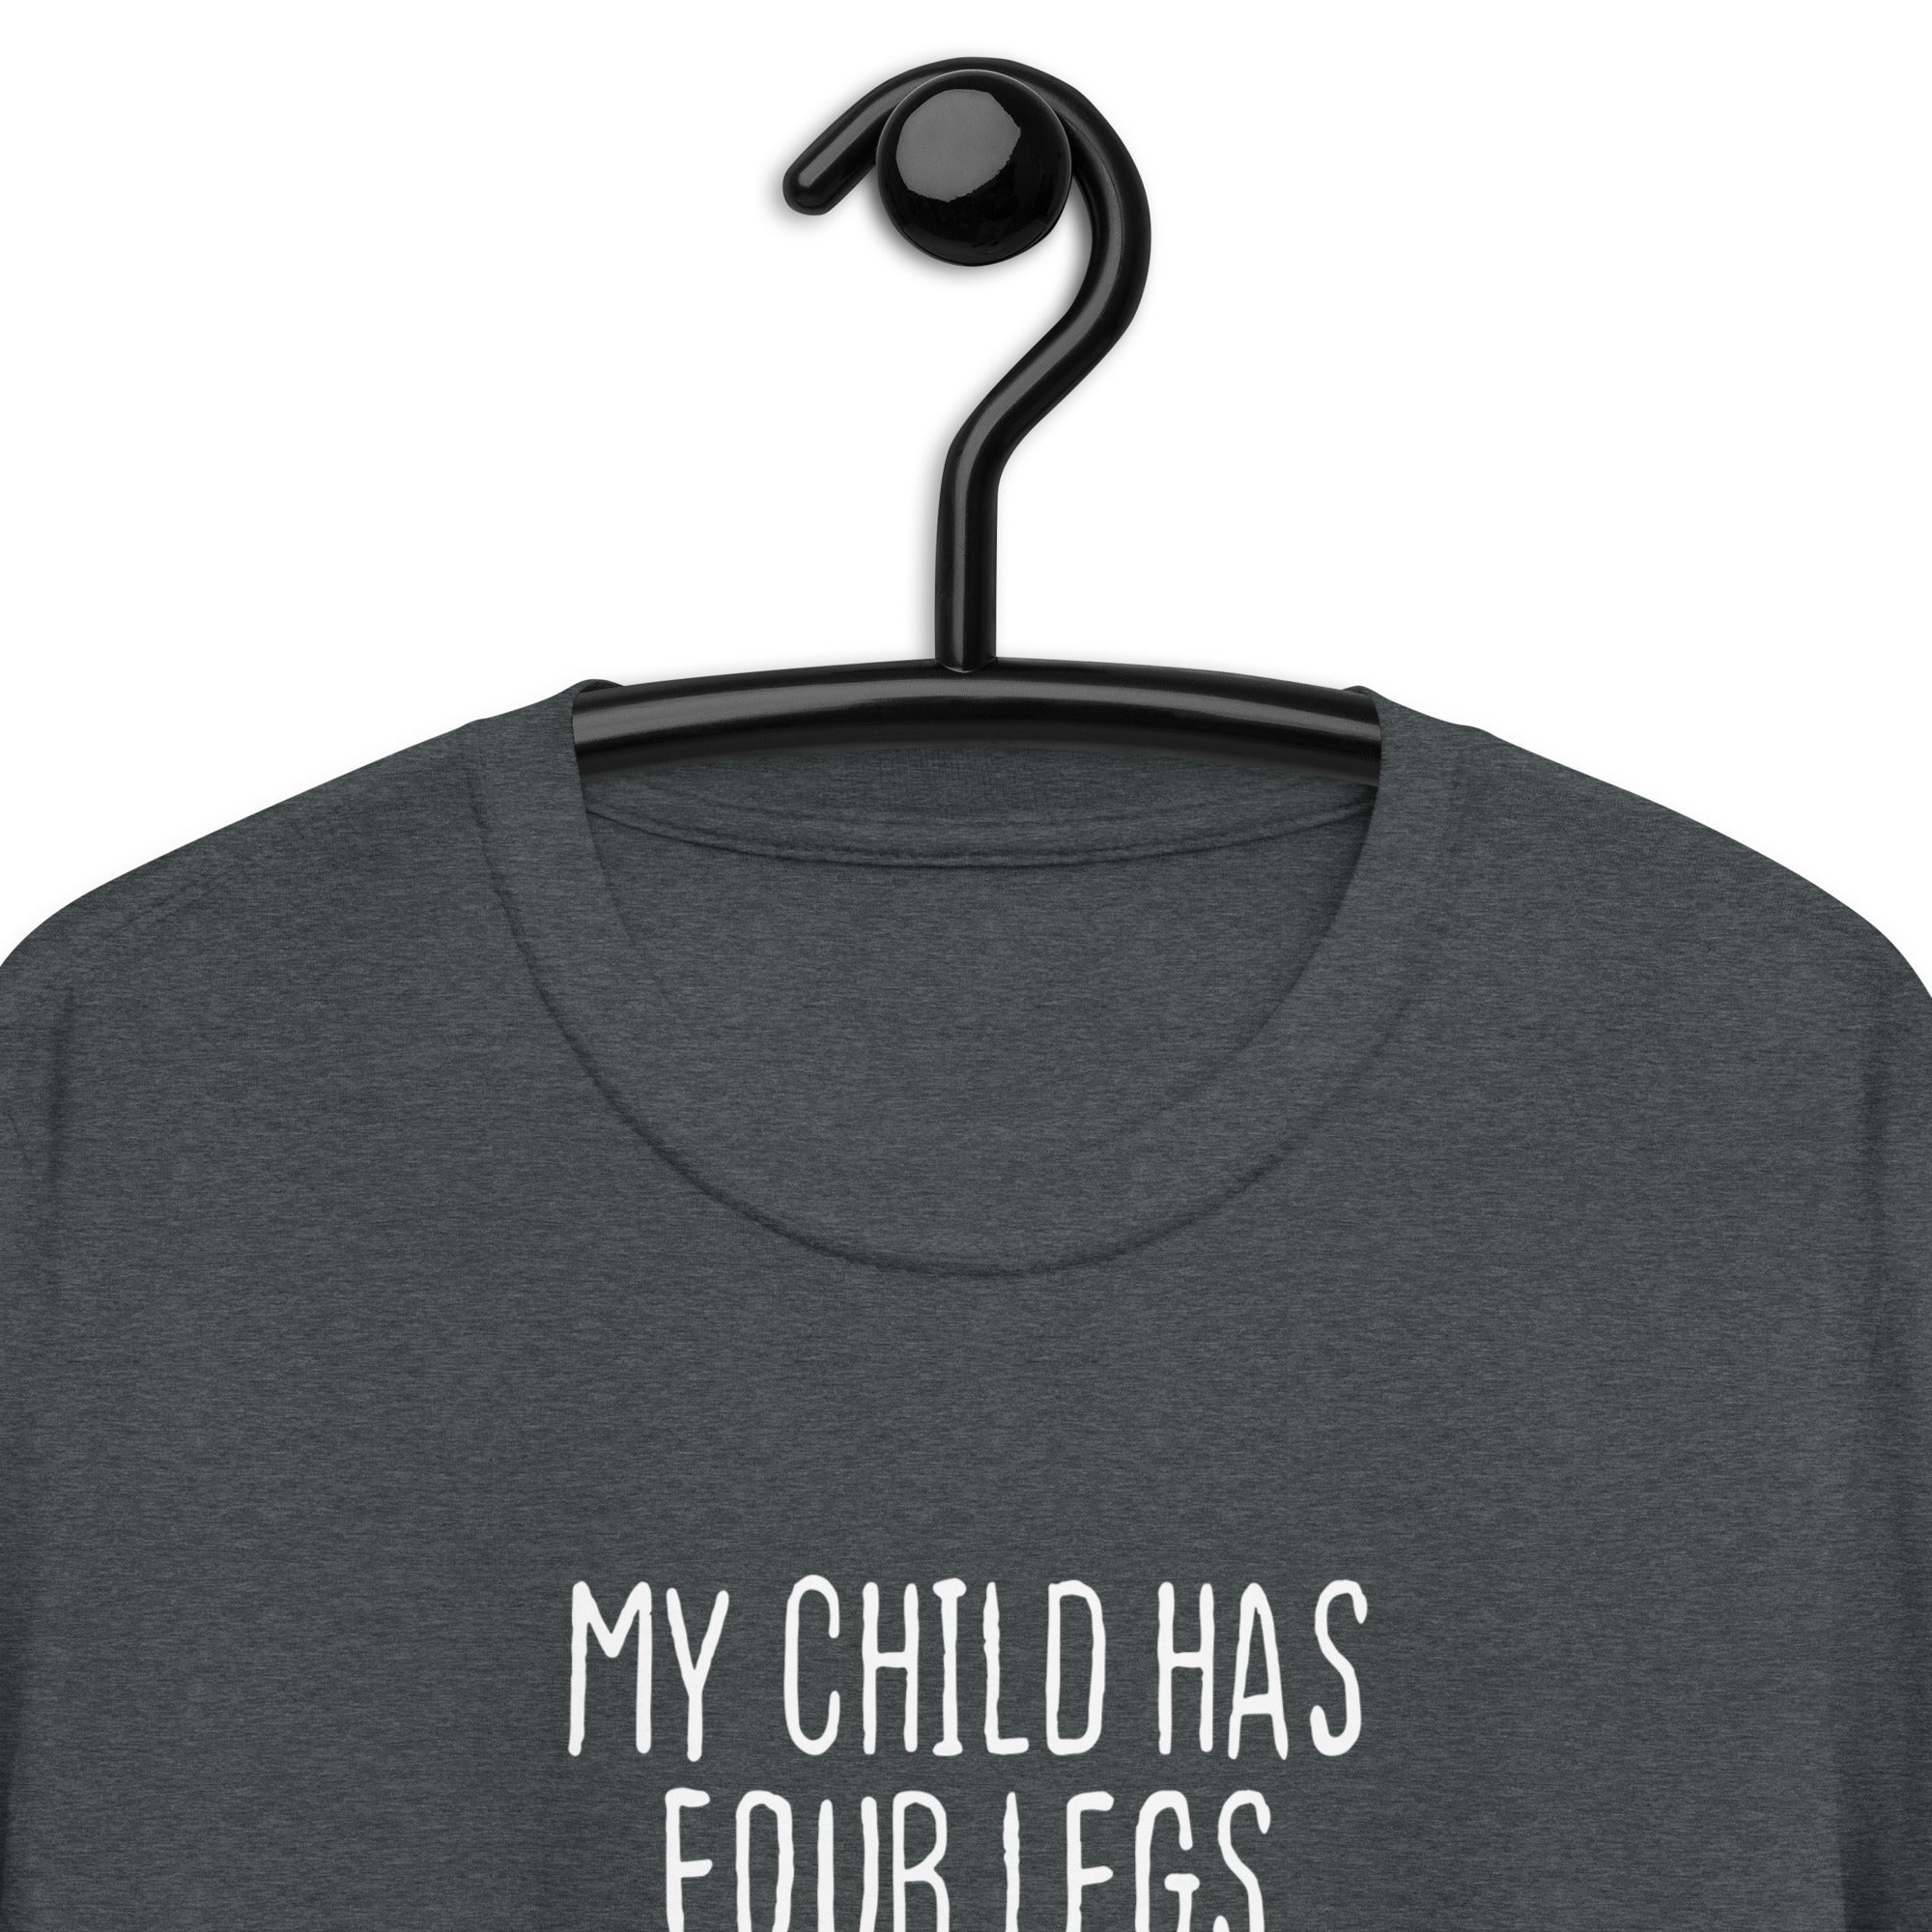 Short-Sleeve Unisex T-Shirt | My child has four legs and is covered in fur